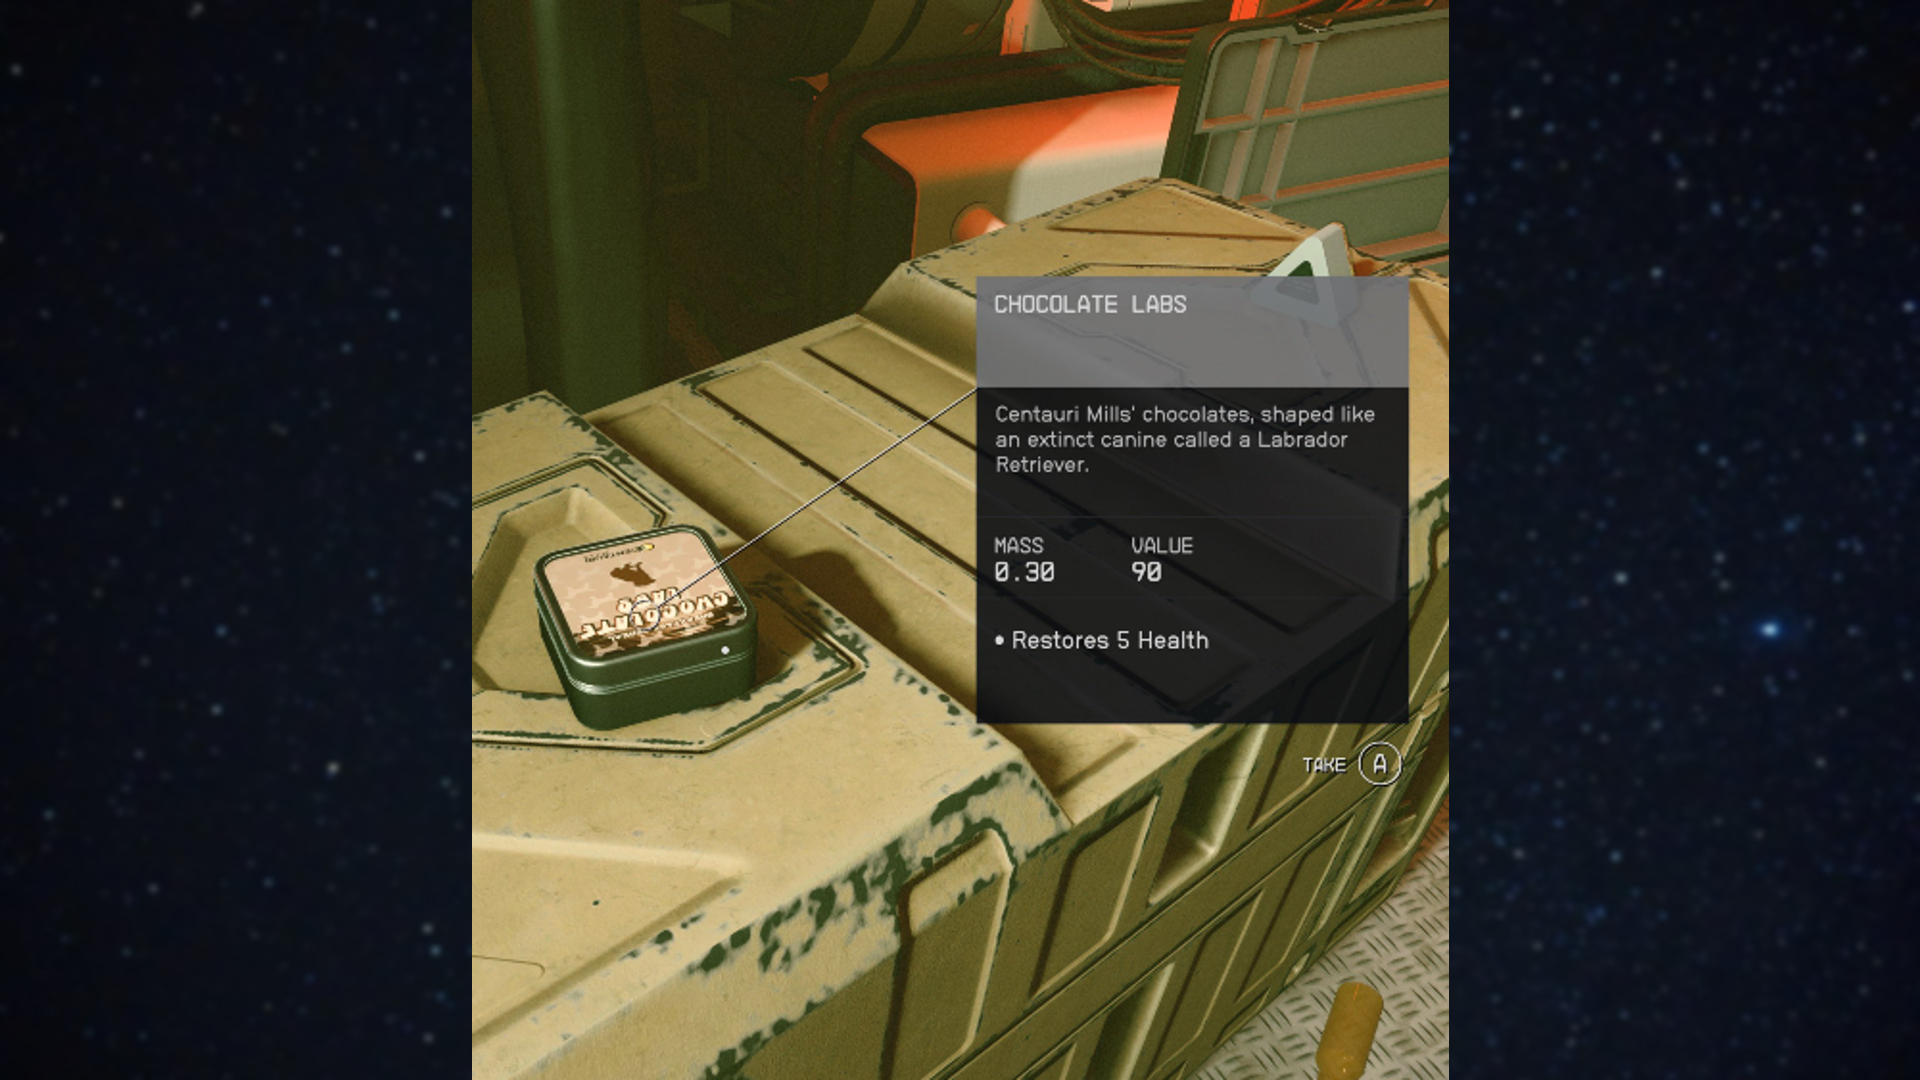 Starfield screenshot showing the in-game snack called Choco Labs, and its item description